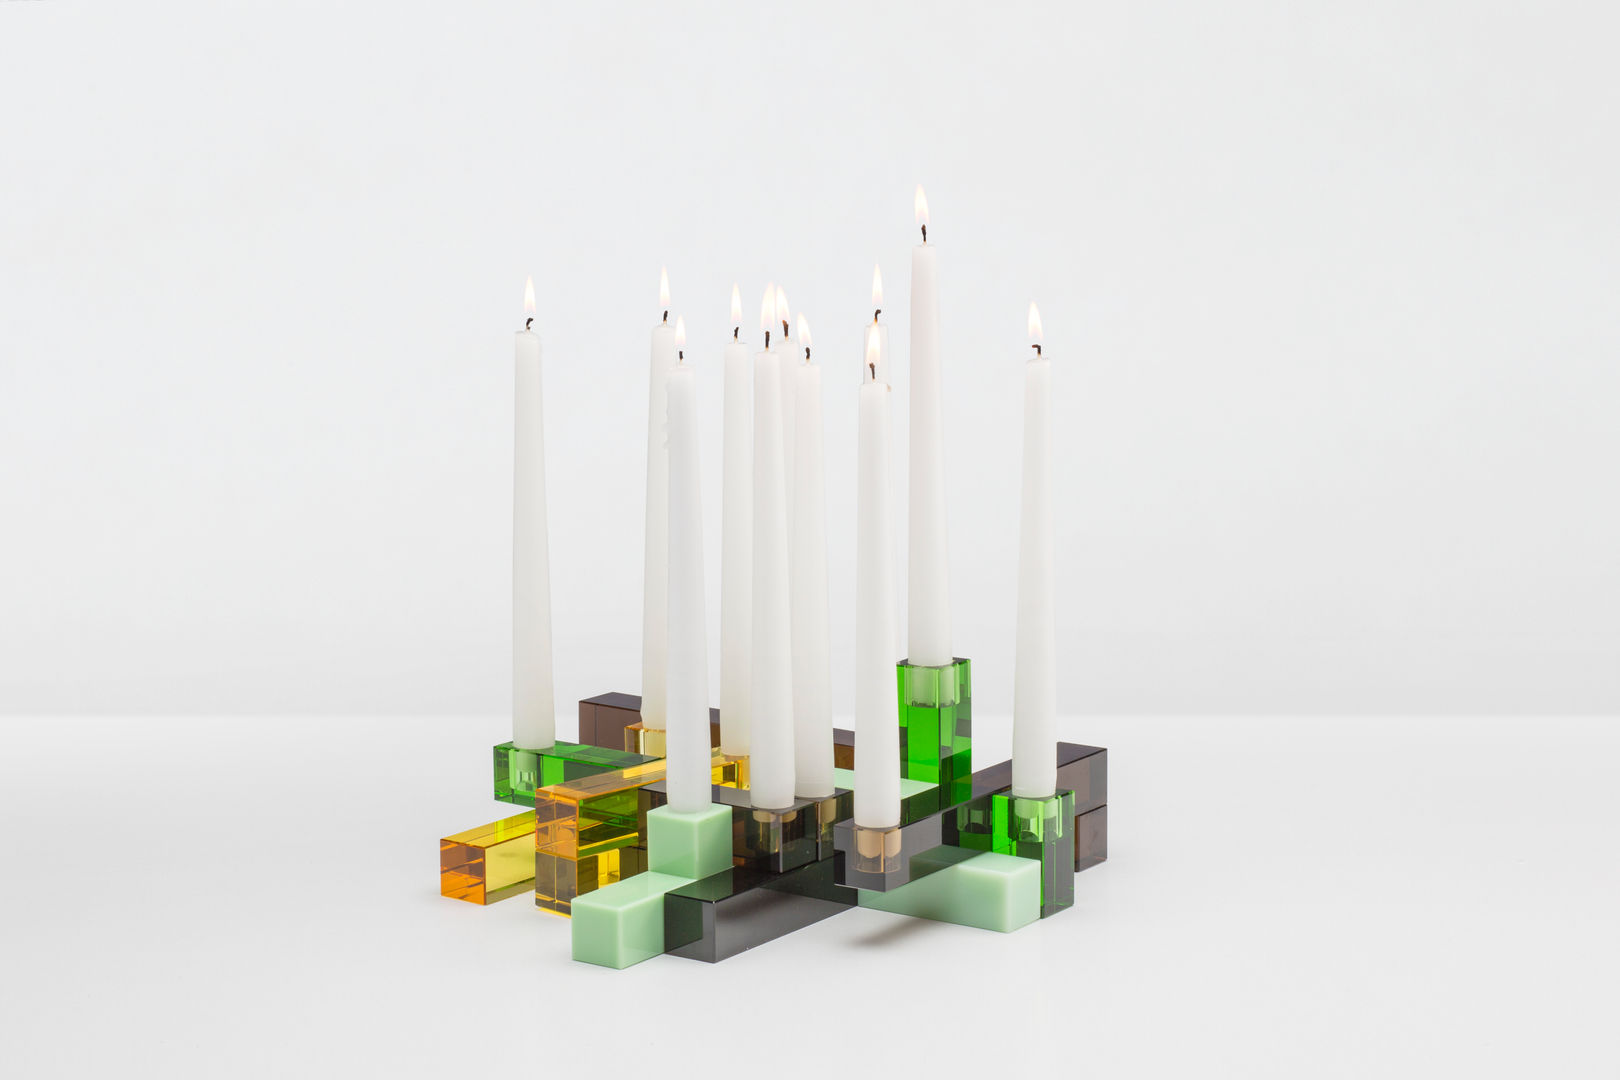 SILUET Candle holders by PearsonLloyd homify Vườn nội thất Interior landscaping